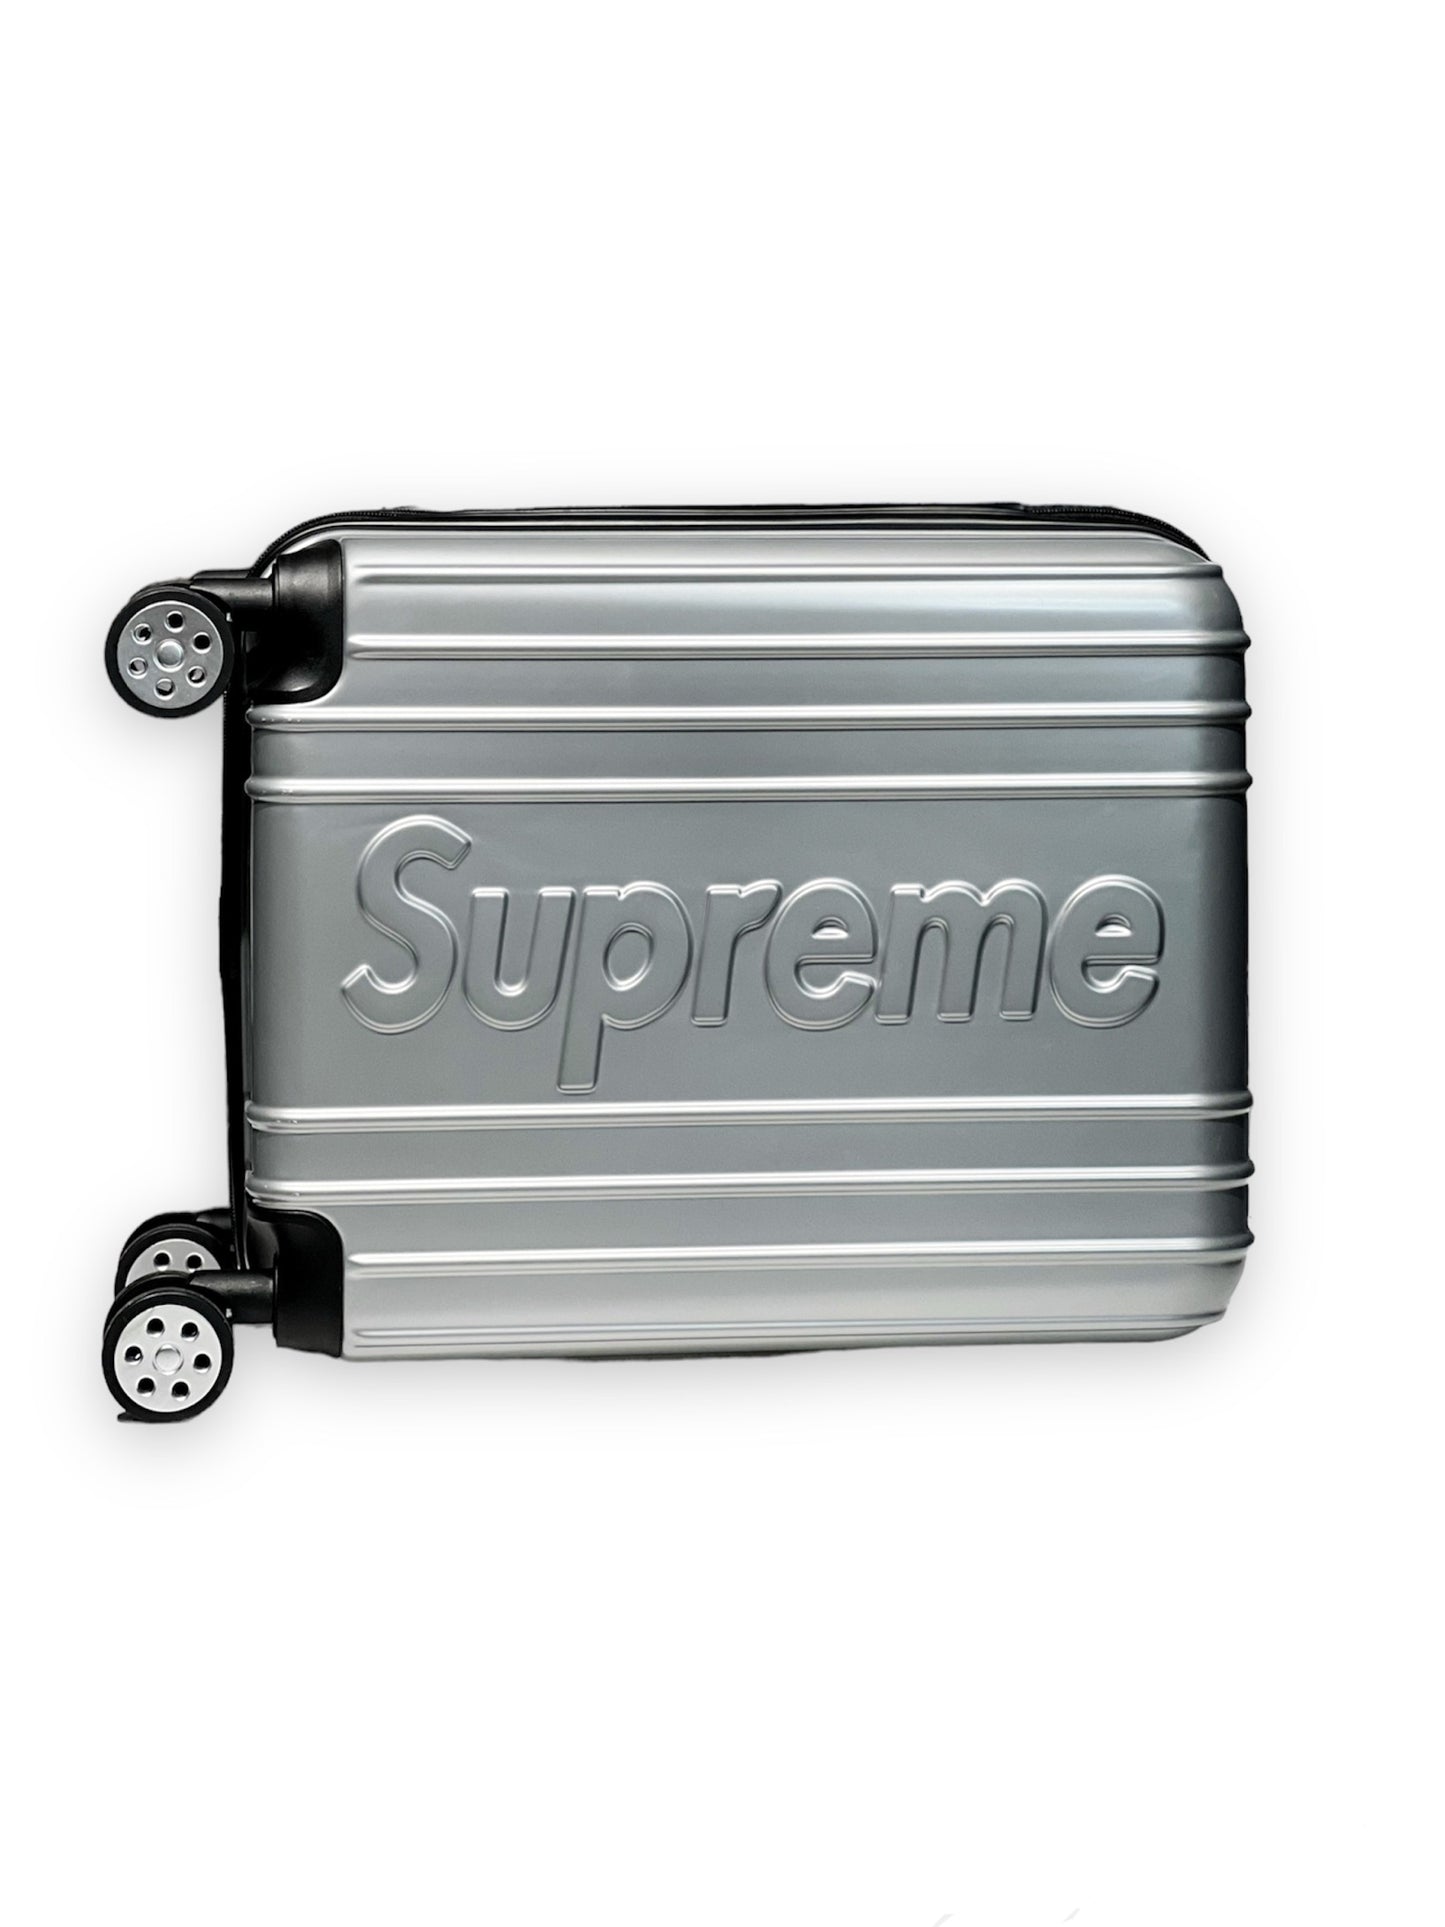 Affordable supreme luggage For Sale, Luggage